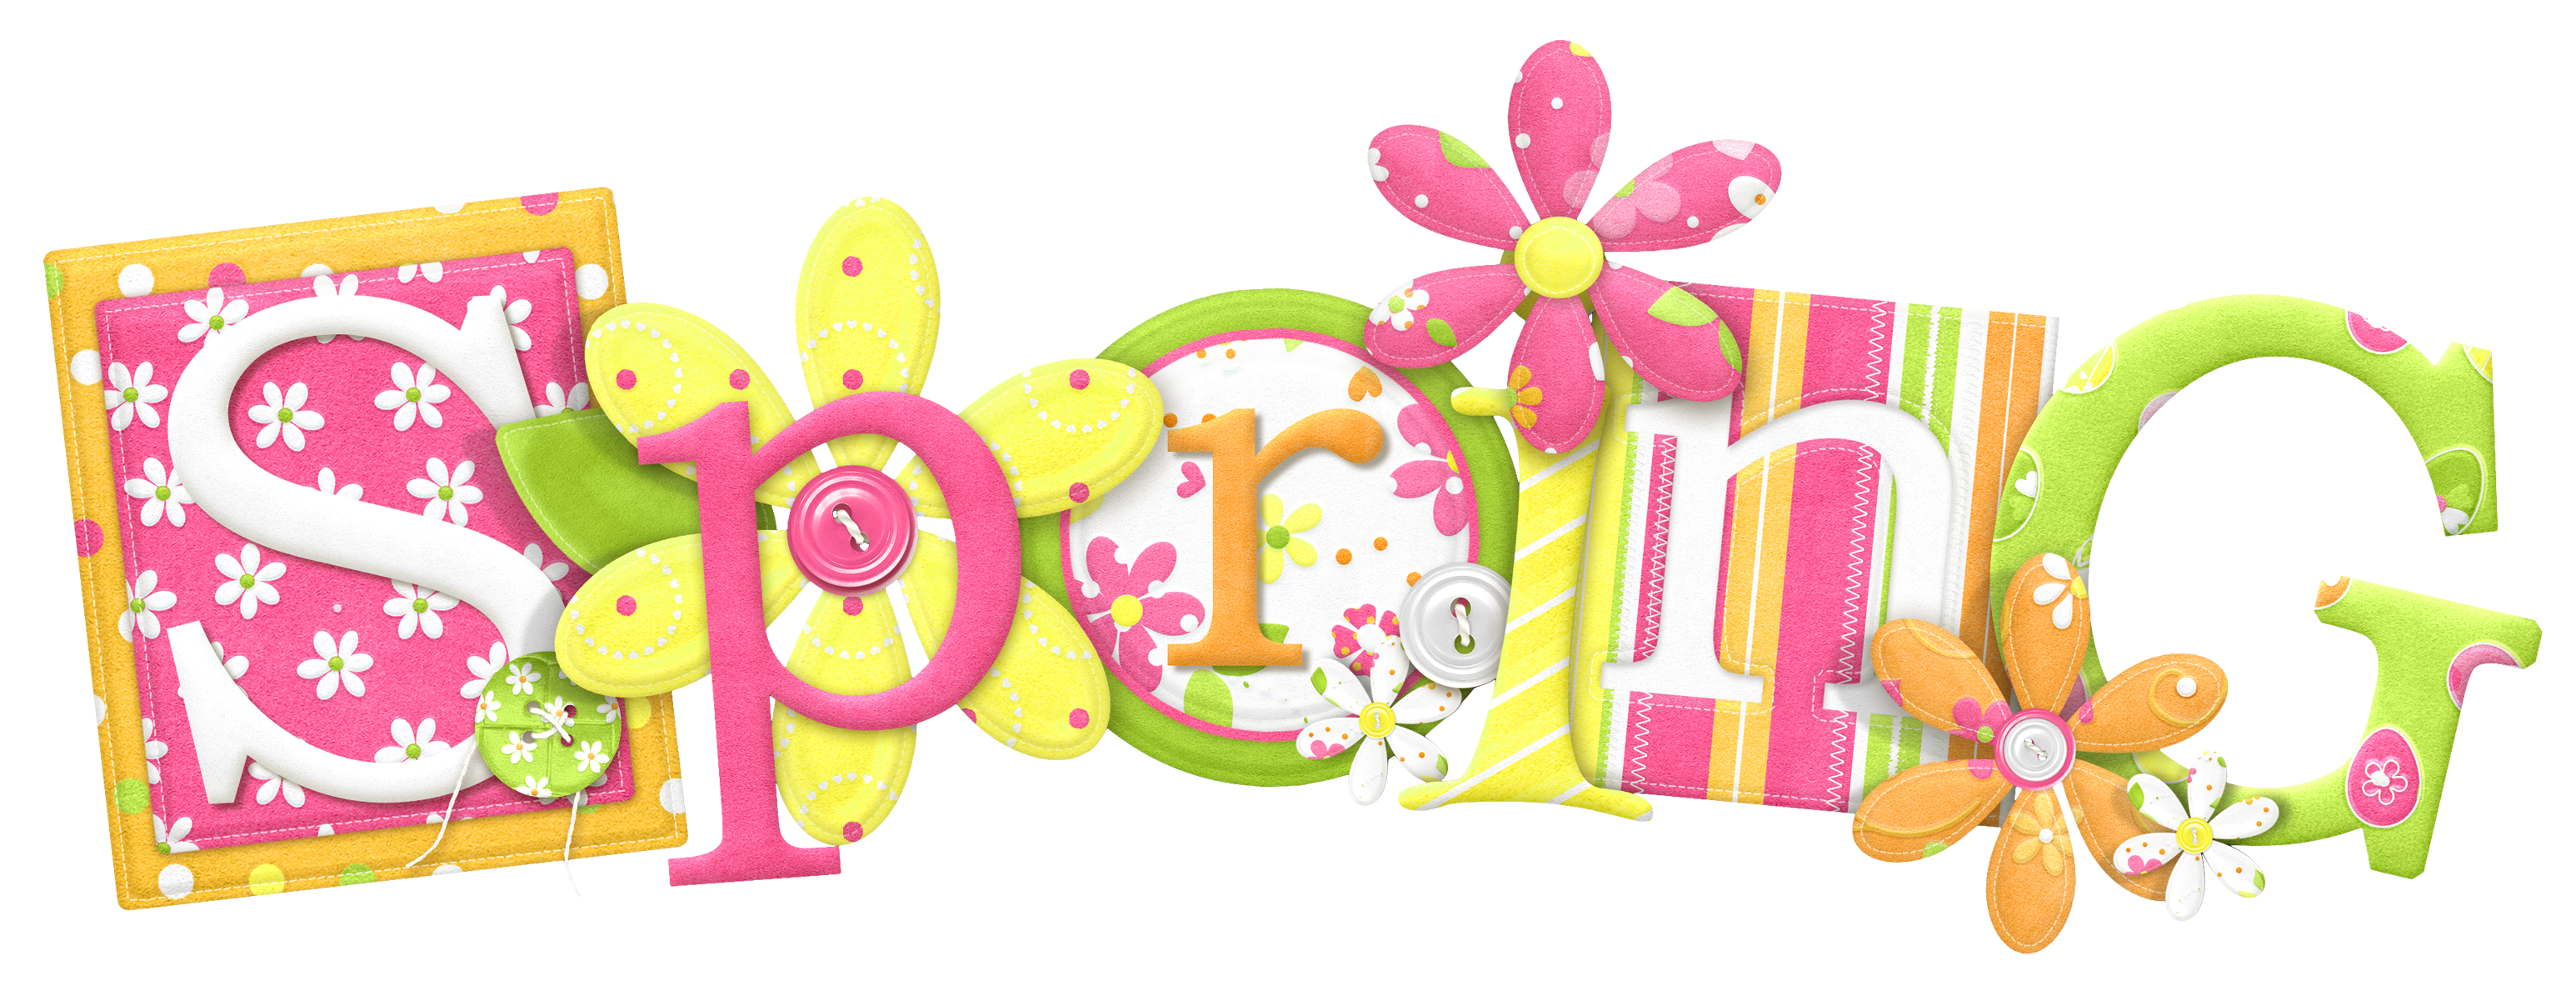 clipart of spring - photo #43